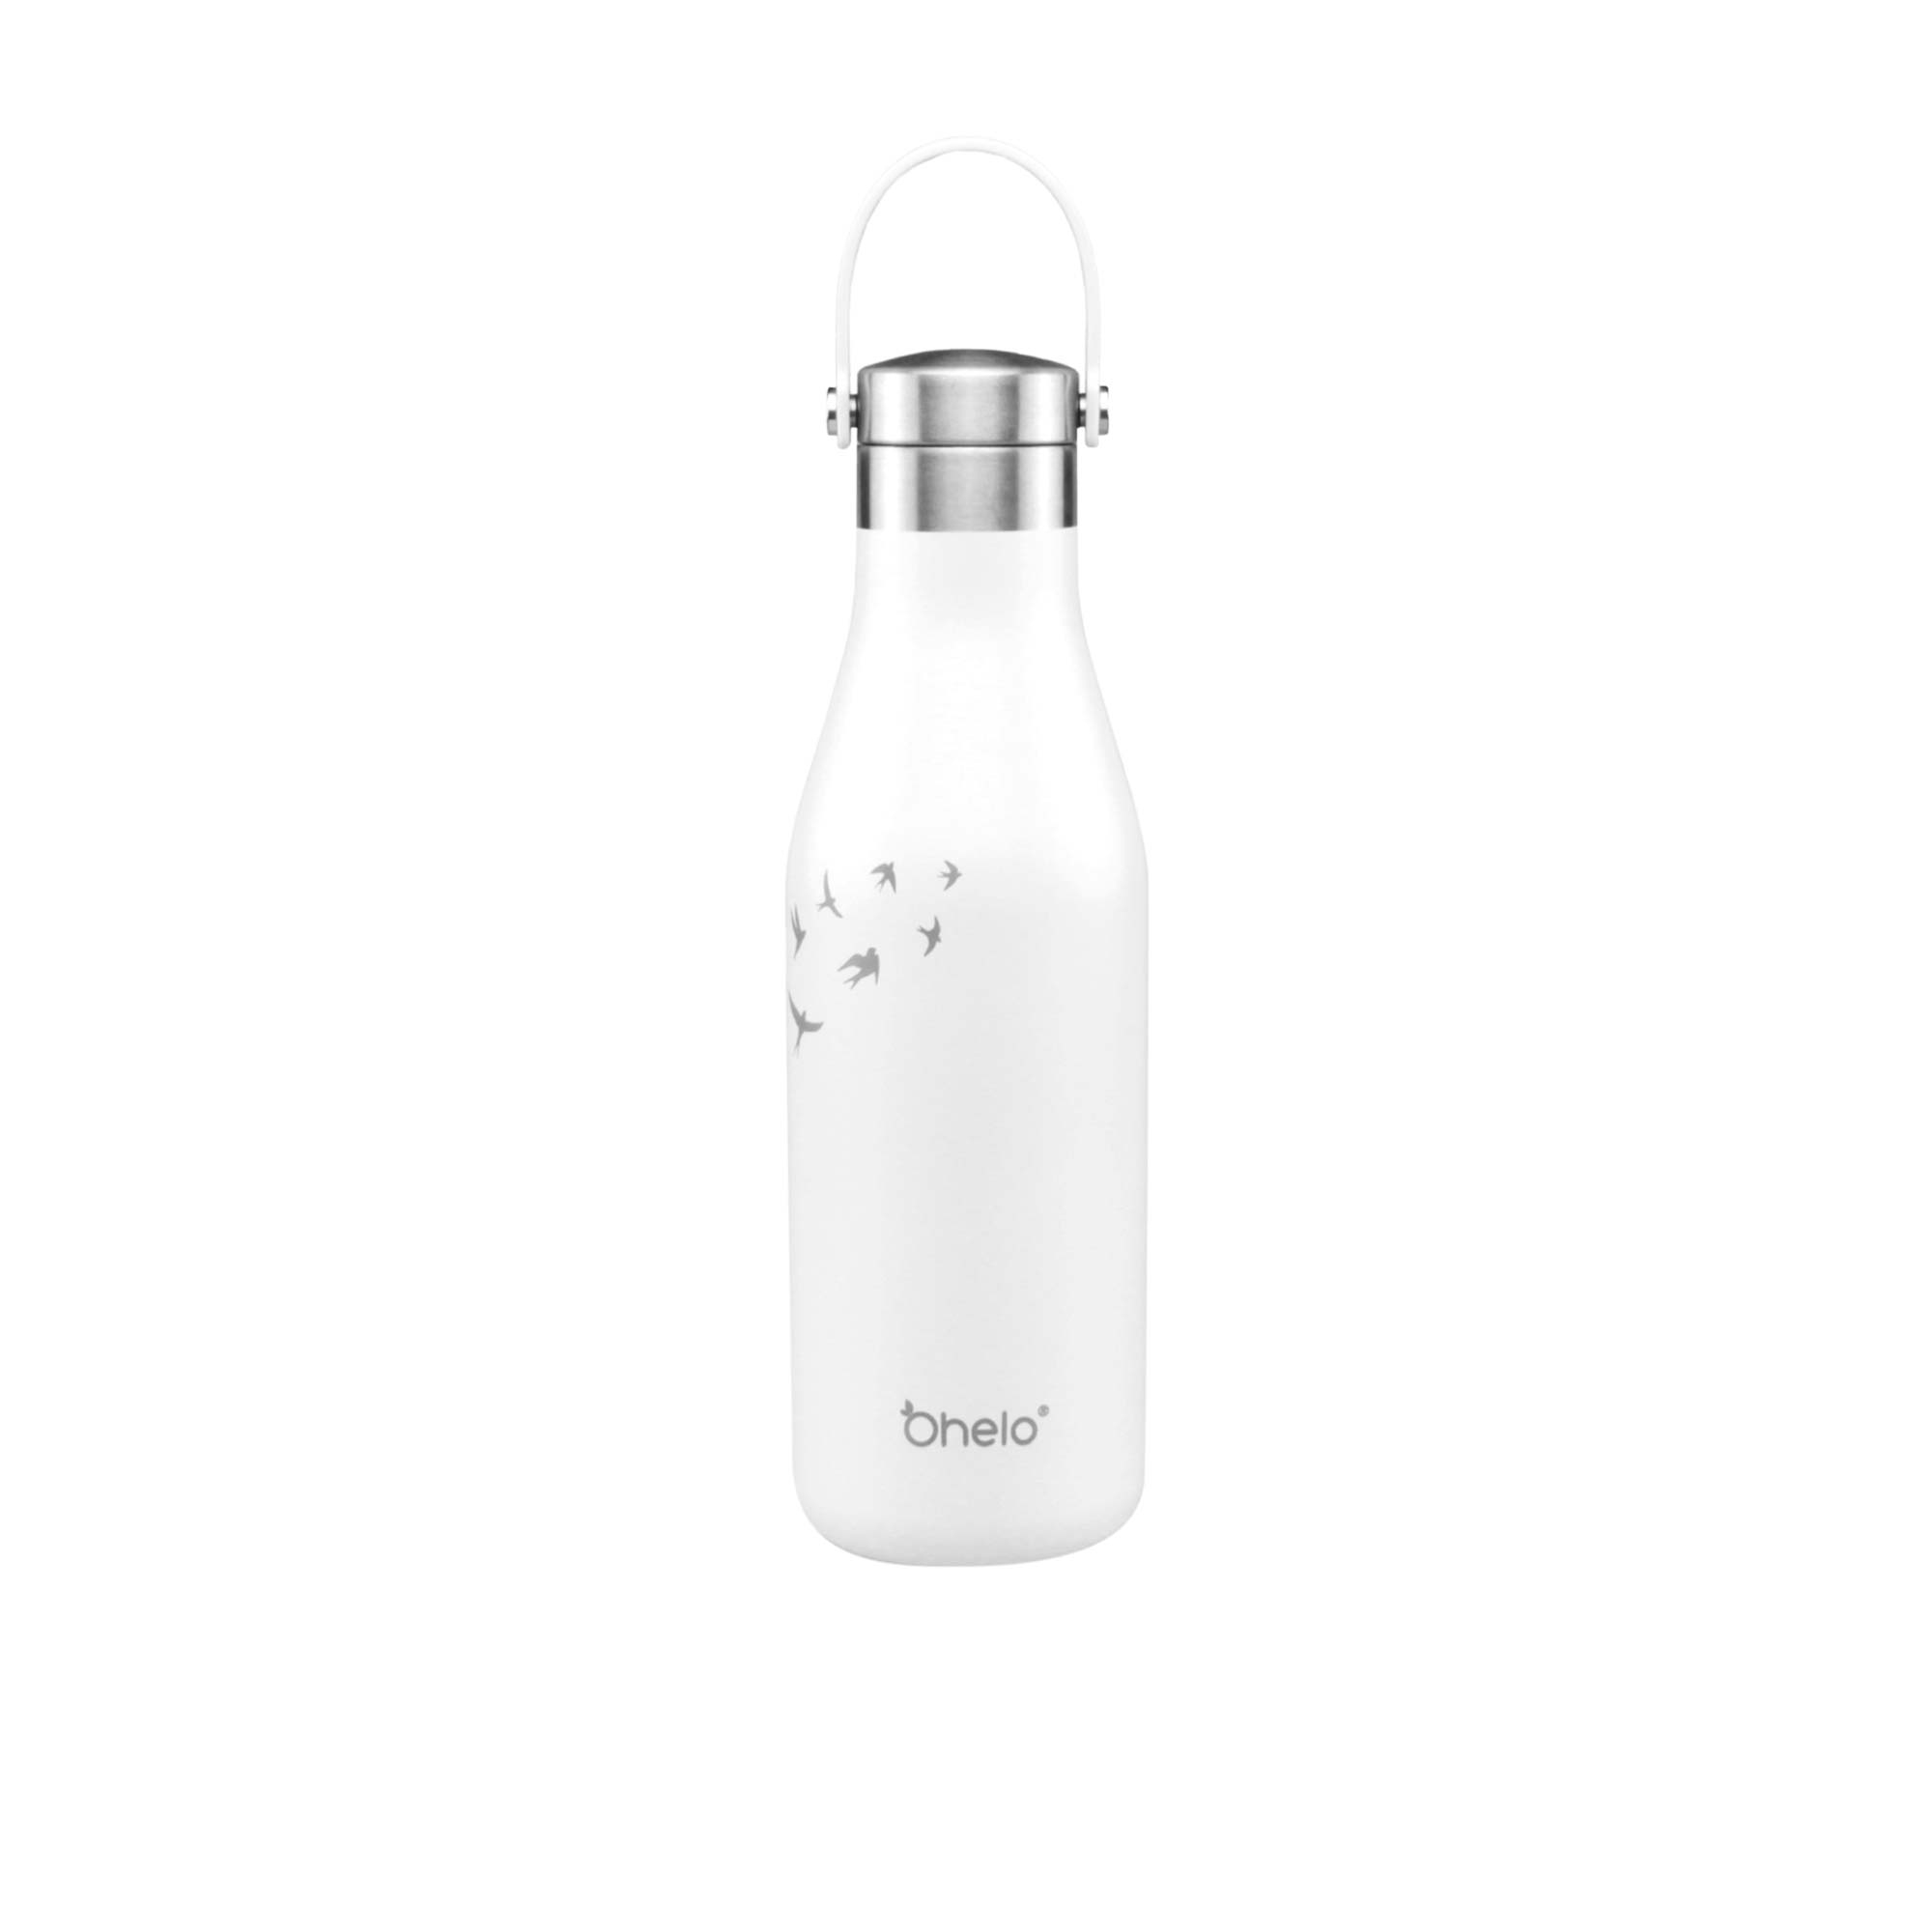 Ohelo Insulated Drink Bottle 500ml White Image 1